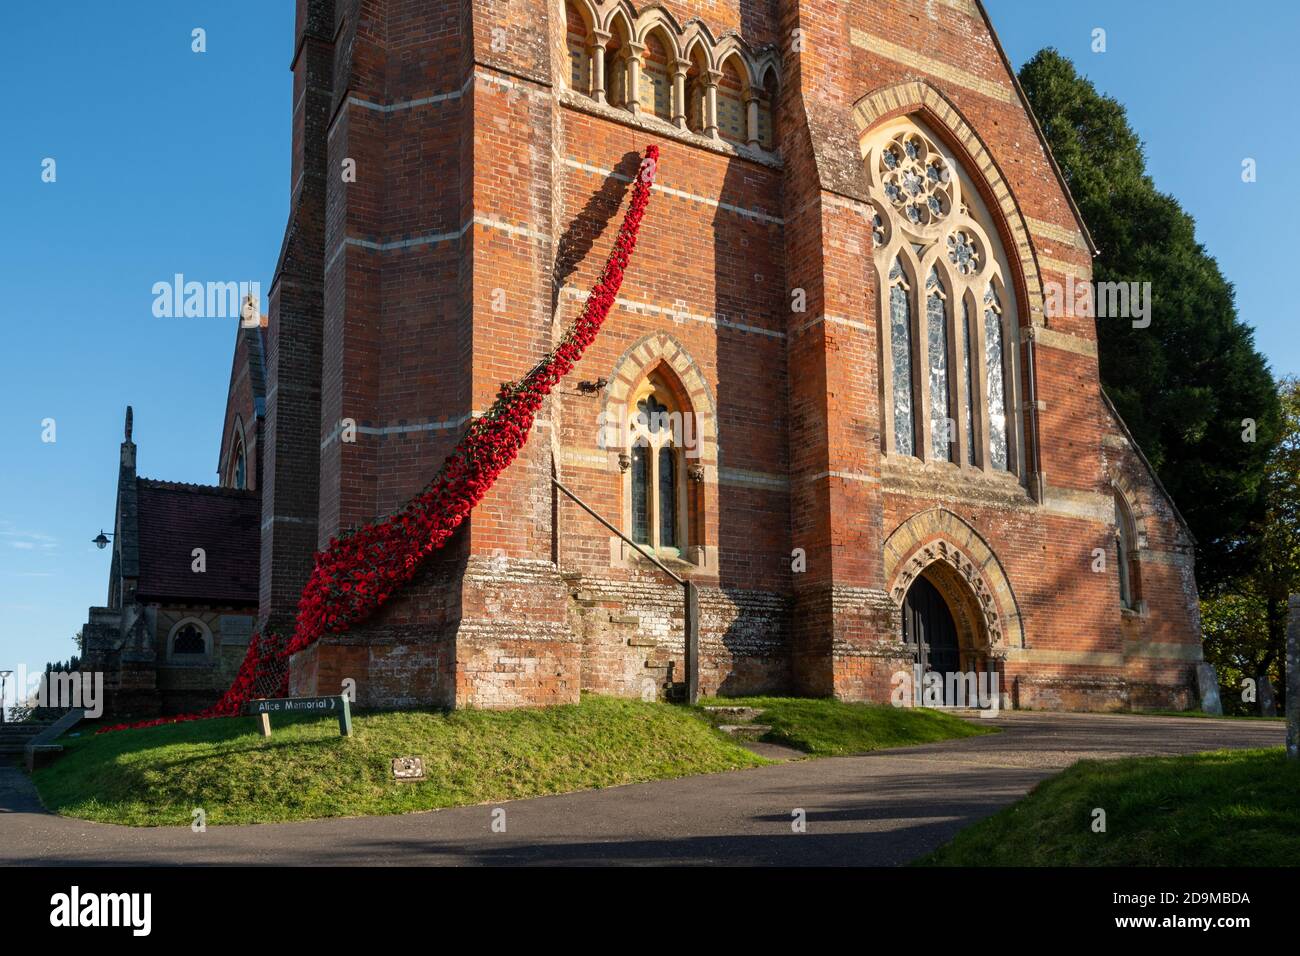 Lyndhurst, Hampshire, UK. 6th November, 2020. The Poppy Appeal has had to adapt this year because of the second lockdown in England due to the coronavirus covid-19 pandemic, and people have been finding different ways to commemorate Remembrance Day. The Church of St Michael's and All Angels in Lyndhurst has been decorated with knitted and crocheted red poppies made by the local community to create a 'fall of poppies for our fallen'. Stock Photo